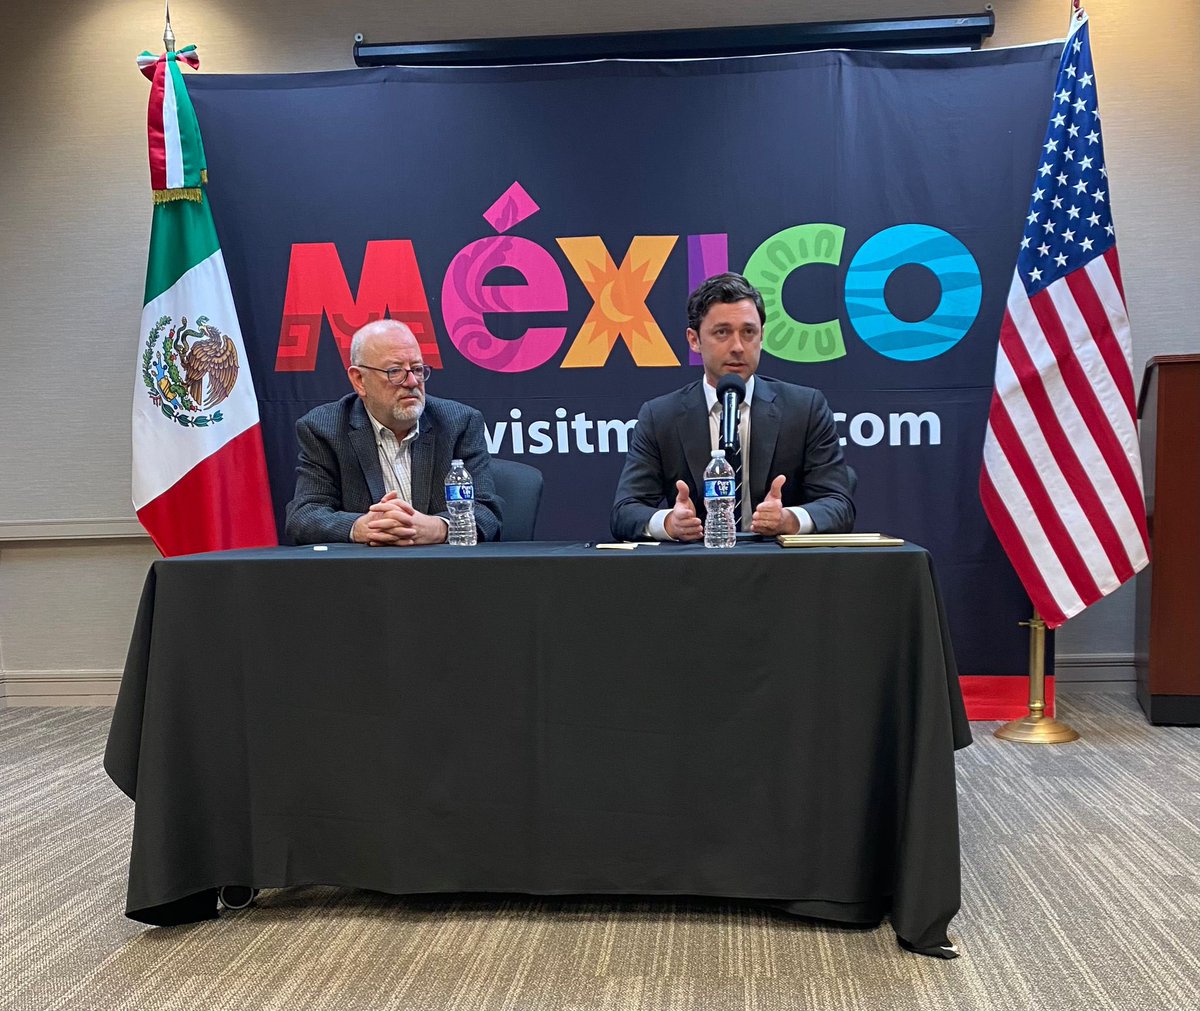 Great meeting at the Mexican Consulate in Atlanta with U.S Senator for Georgia Jon Ossoff and Mexican community leaders. The LACC is always advocating for Latino businesses in Georgia. https://t.co/brW4XmEMpN